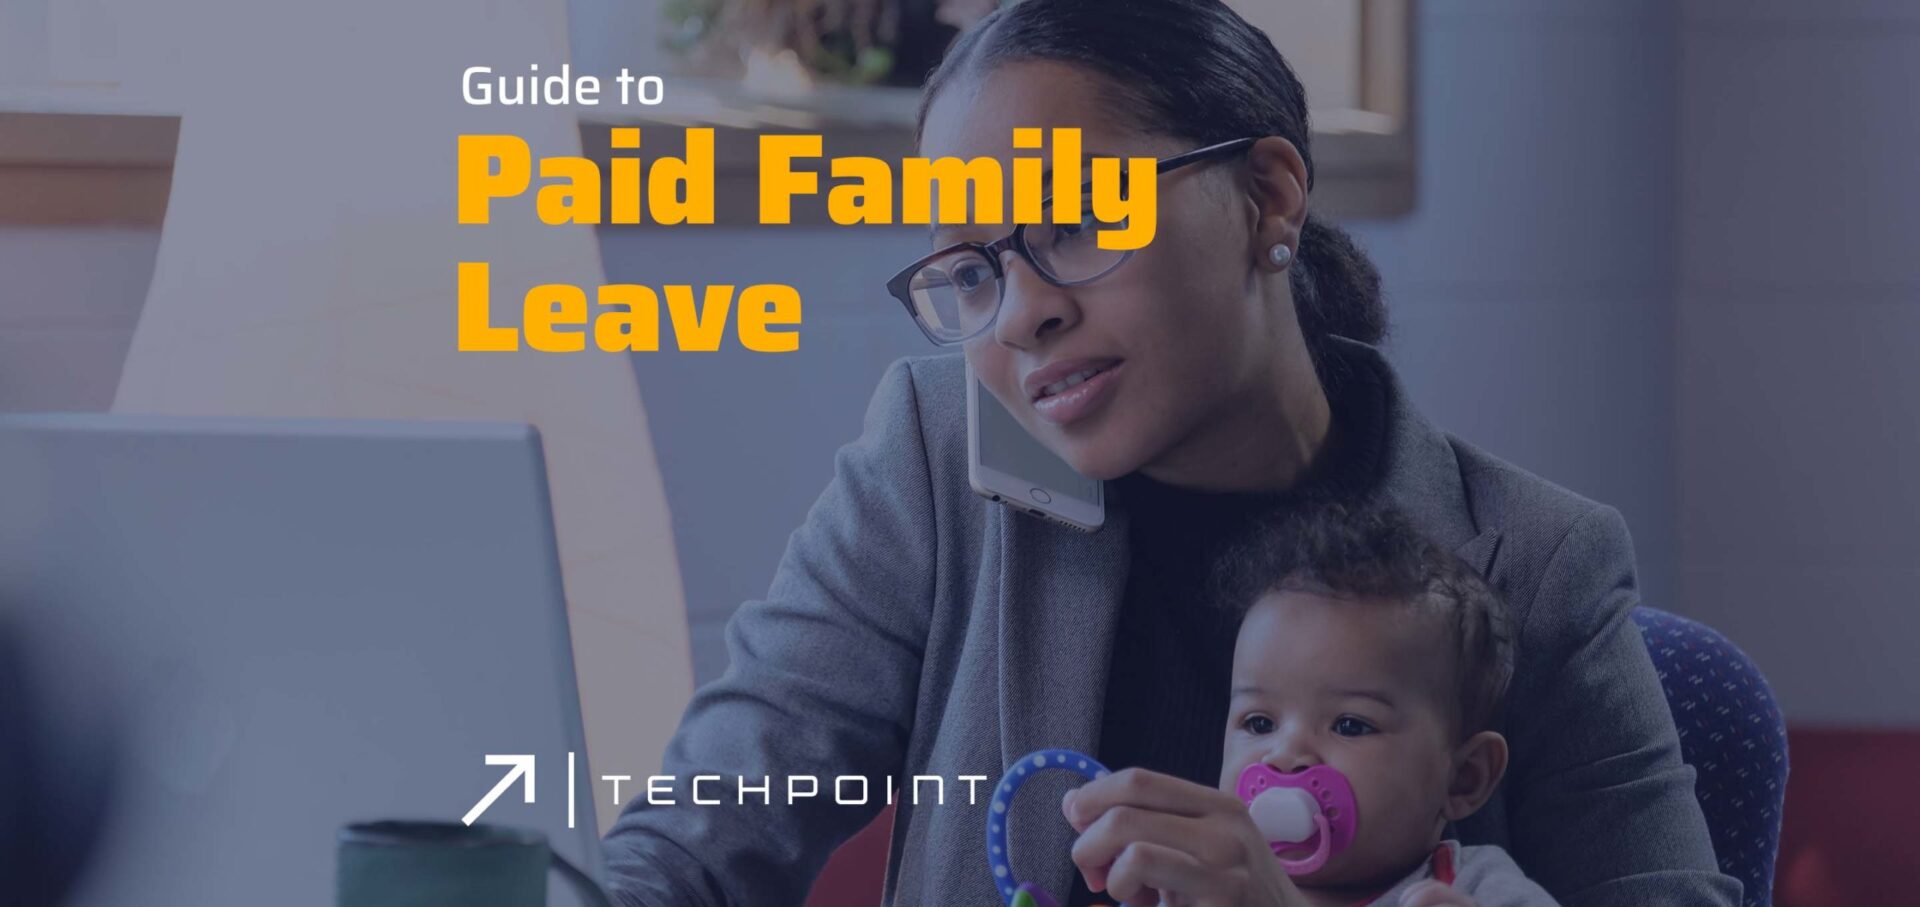 Paid Parental Leave in Tech